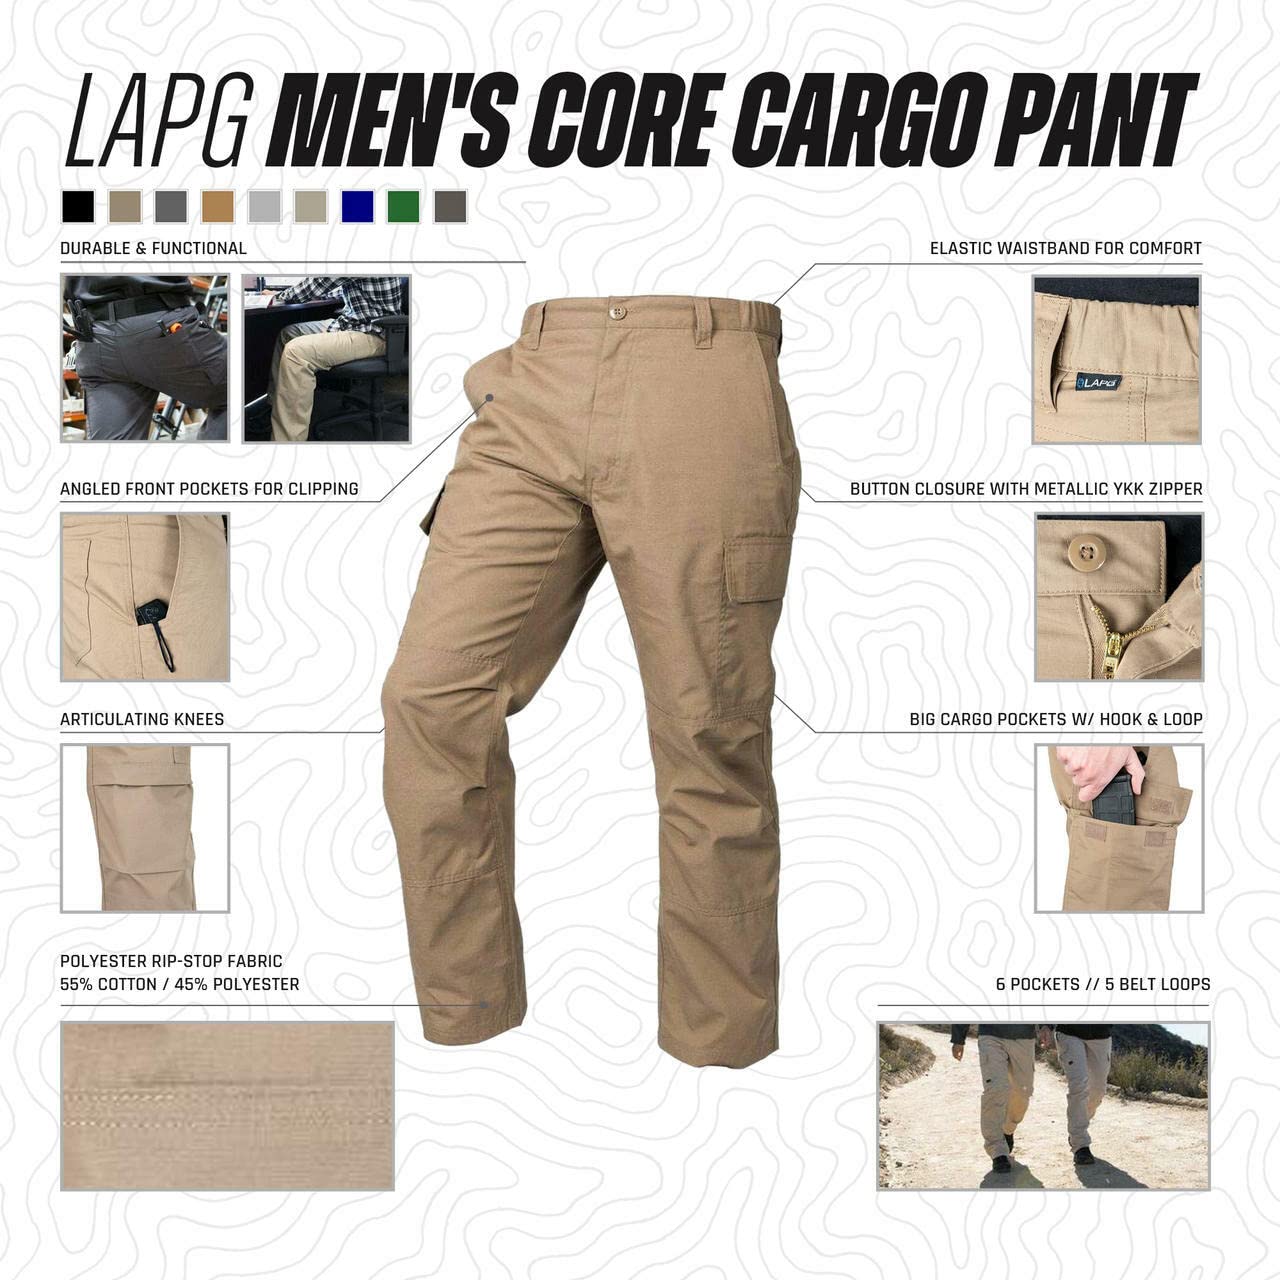 LA Police Gear Men's Core Cargo Lightweight Tactical Pants, Durable Ripstop Cargo Pants for Men, Stretch Waistband CCW Pants - Charcoal - 36 X 34